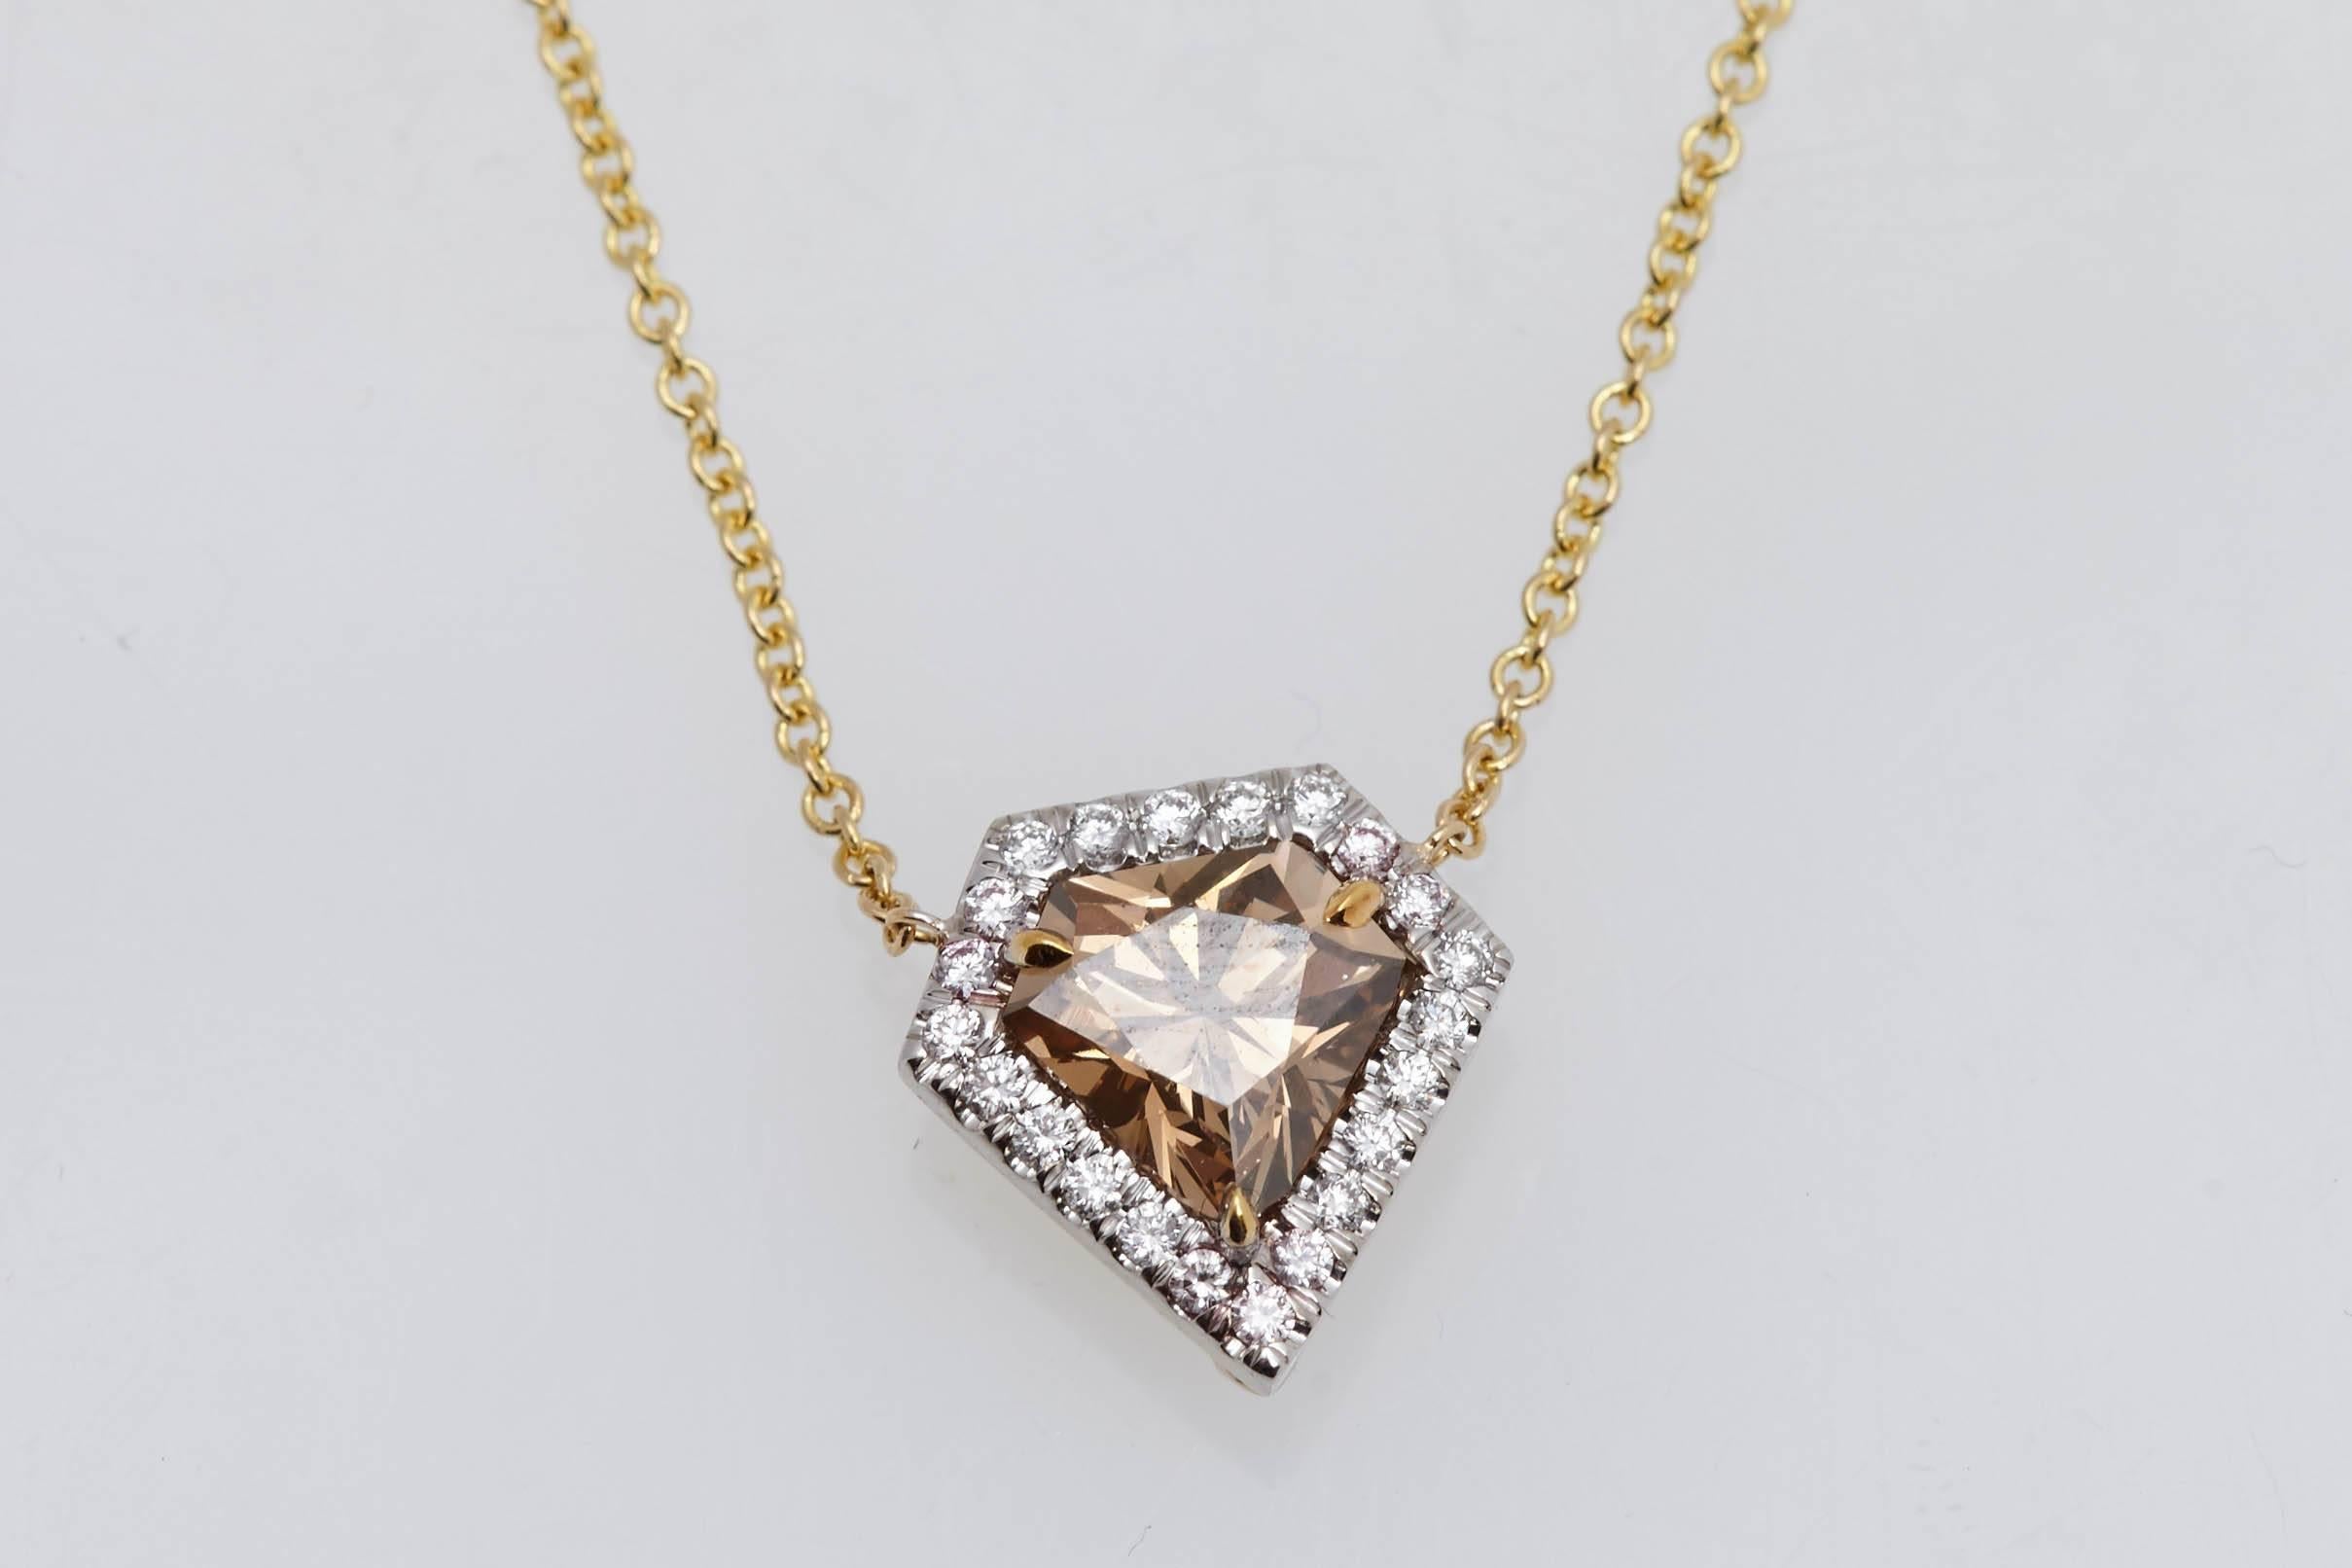 Modern Shield Shaped Diamond 1.45 Carat GIA Natural Fancy Orange-Brown Gold Necklace For Sale